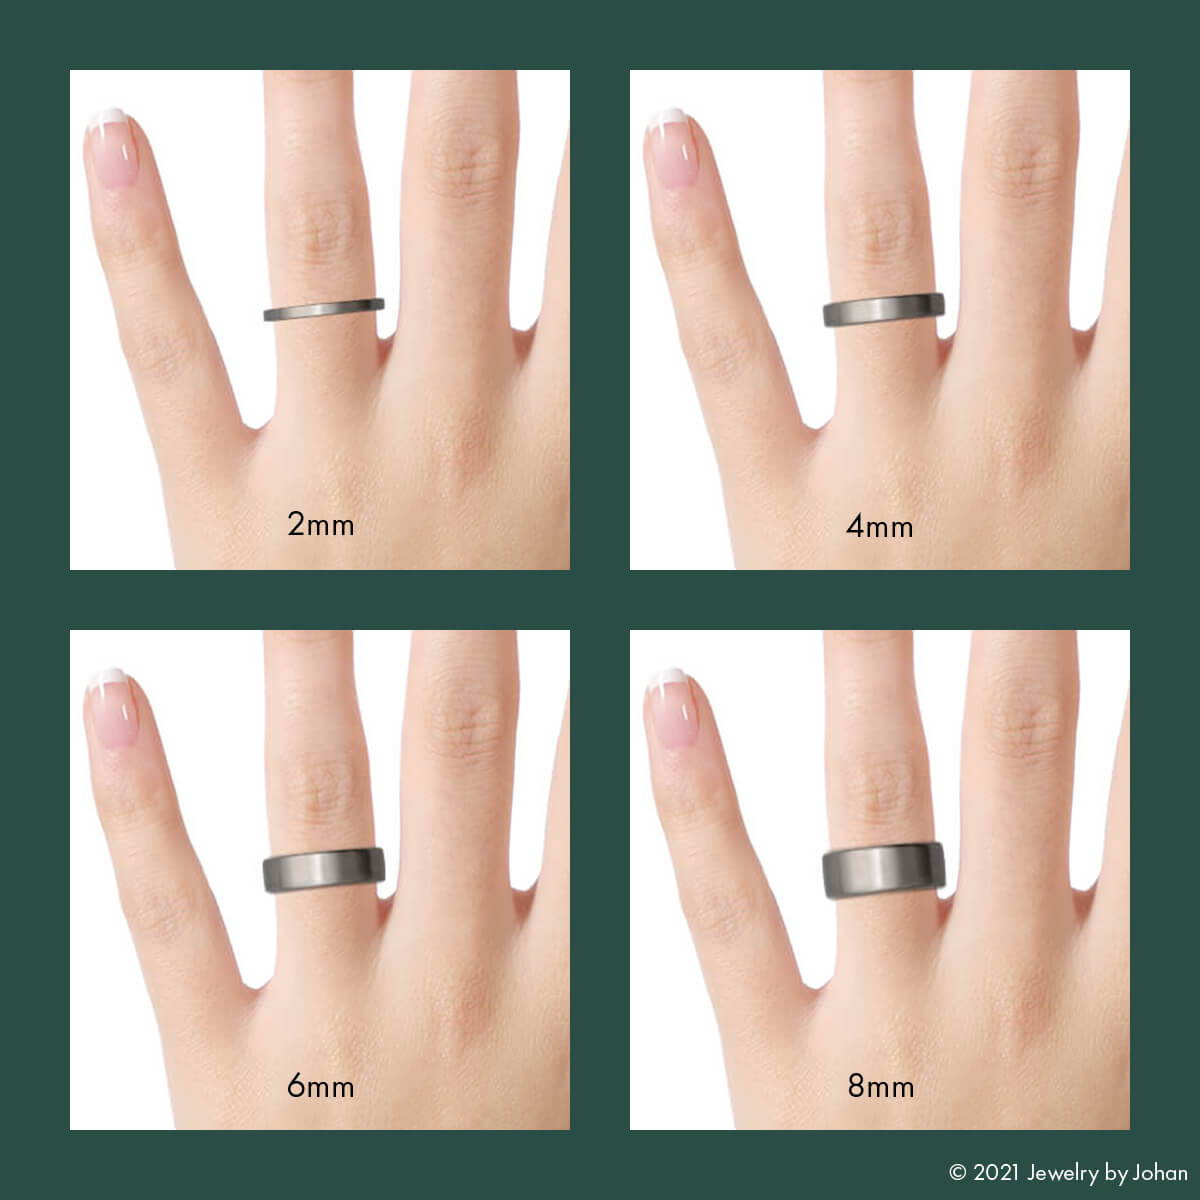 Ring Jewelry Guide, Jewelry Education